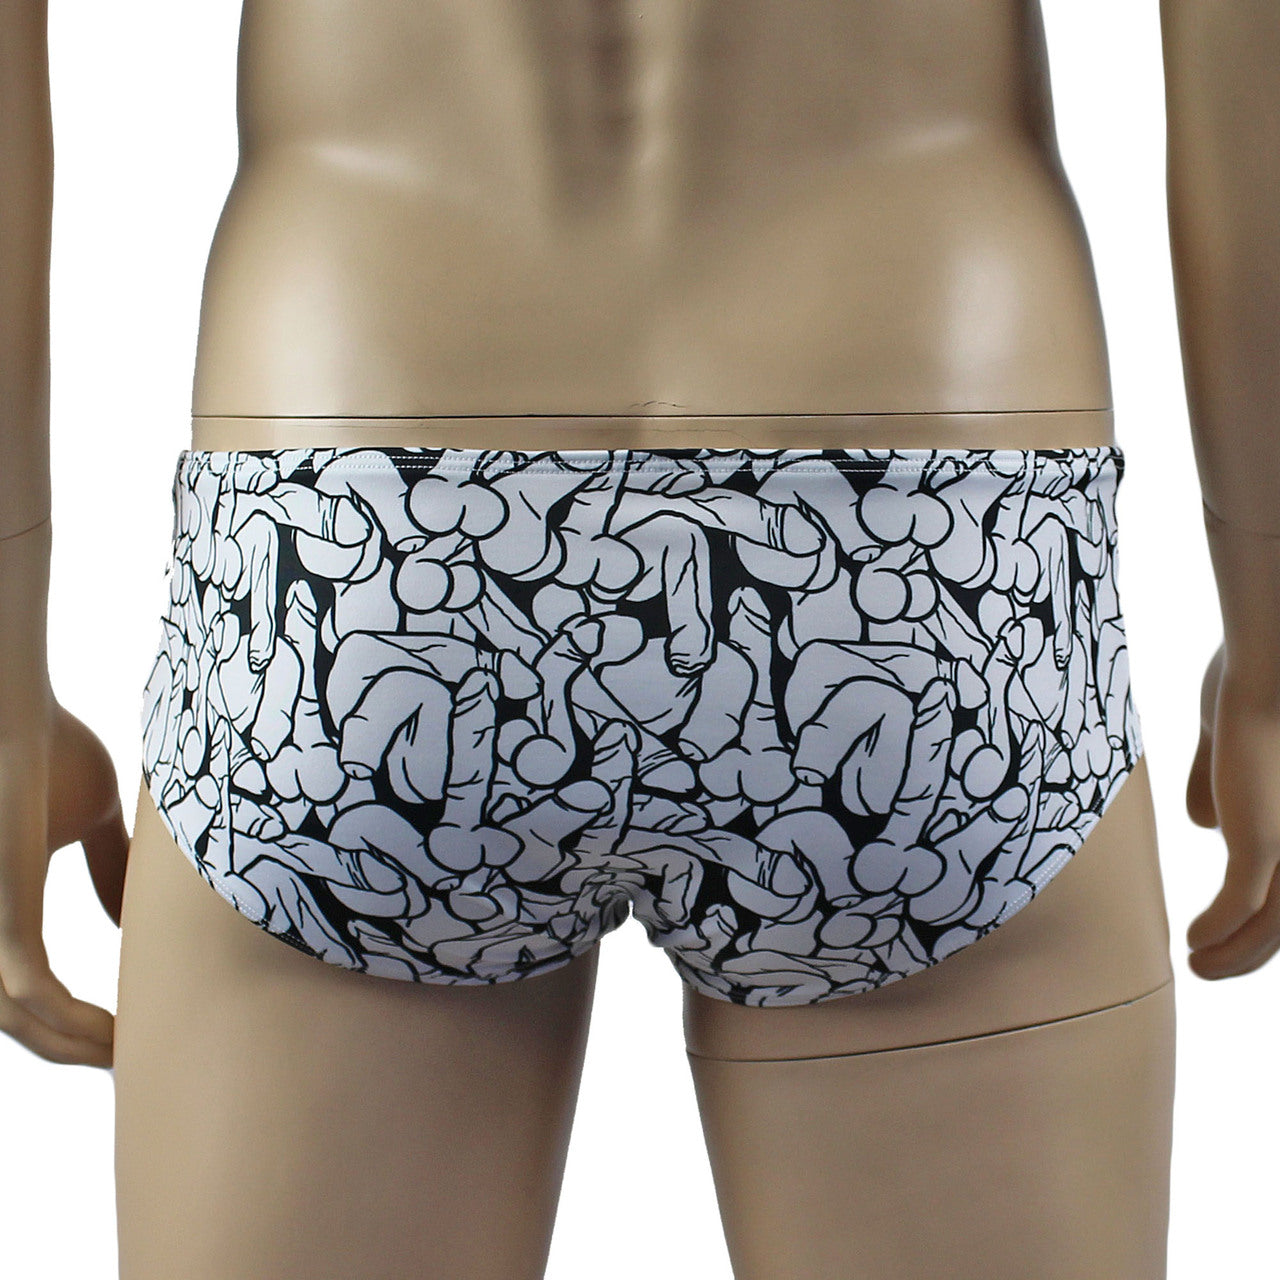 Male Willie Boxer Brief with Naughty Print Black and White